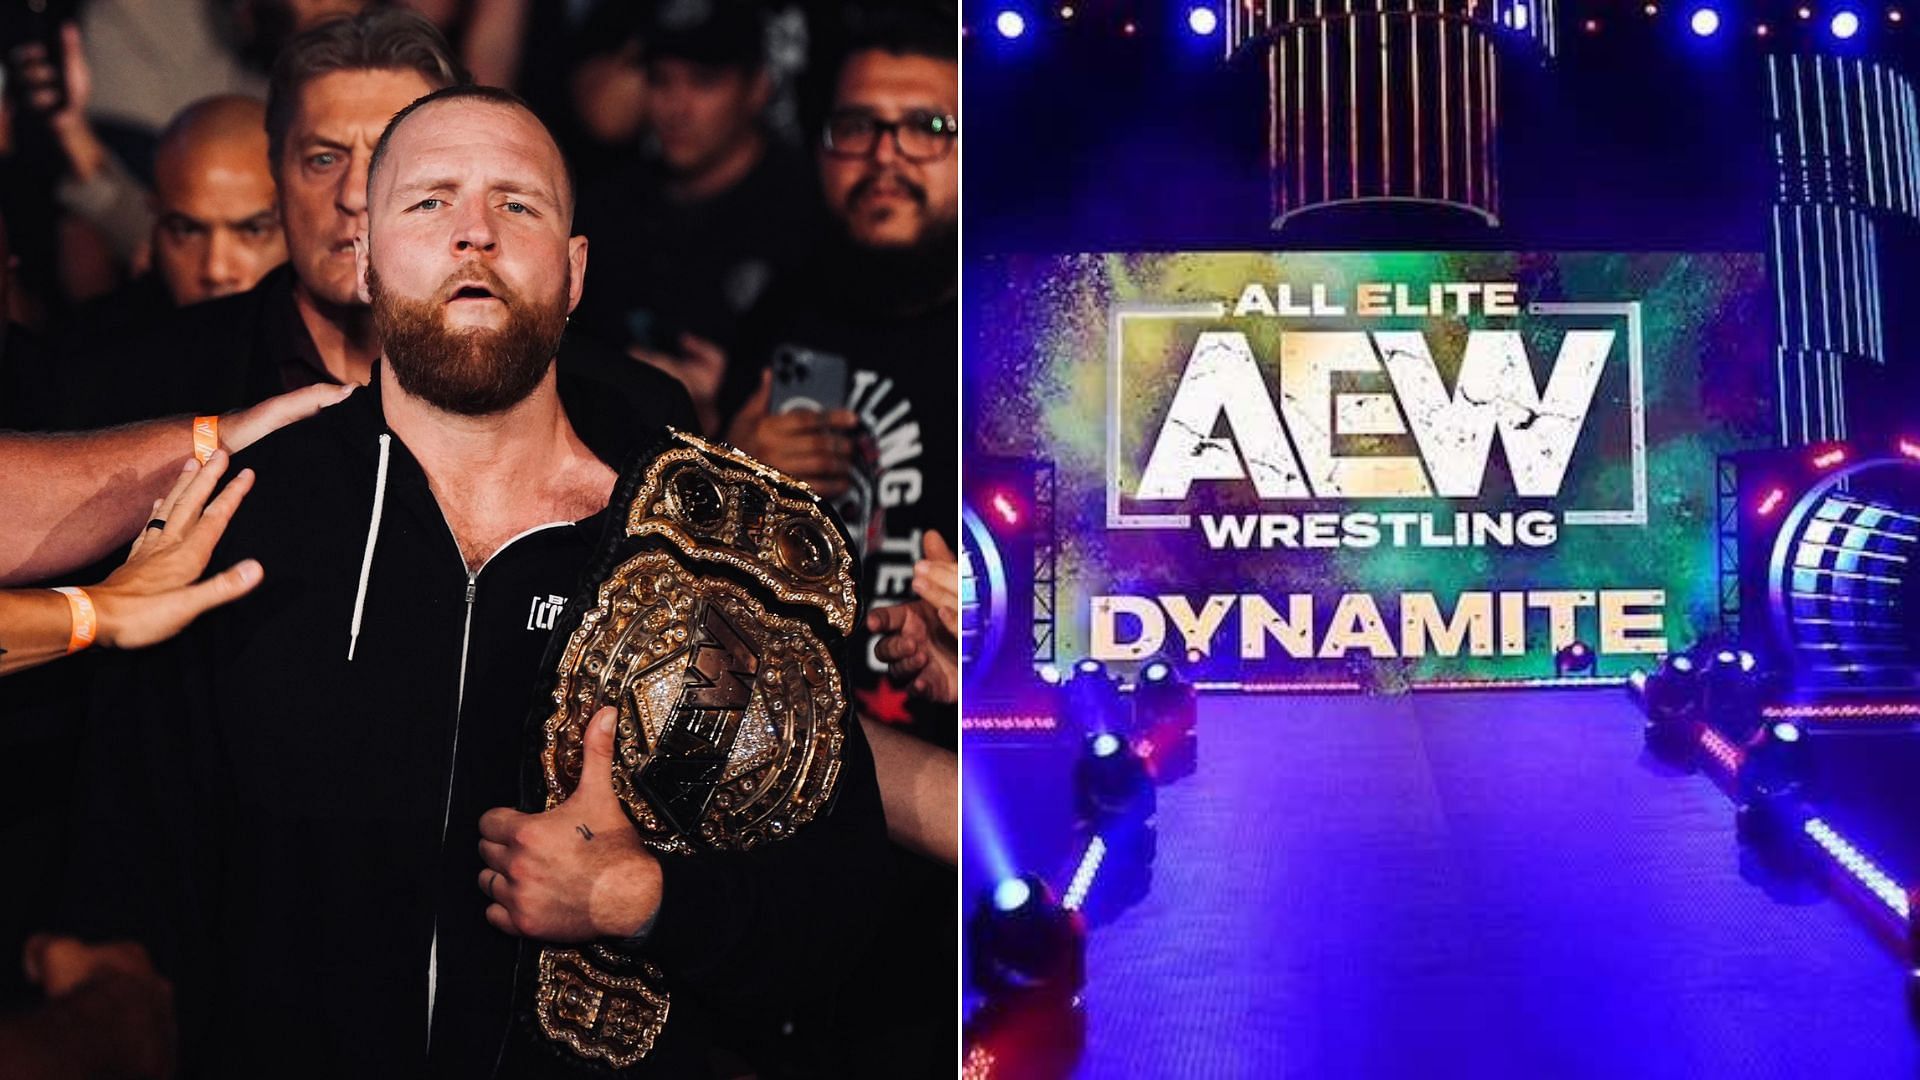 Jon Moxley recently signed a contract extension with AEW!